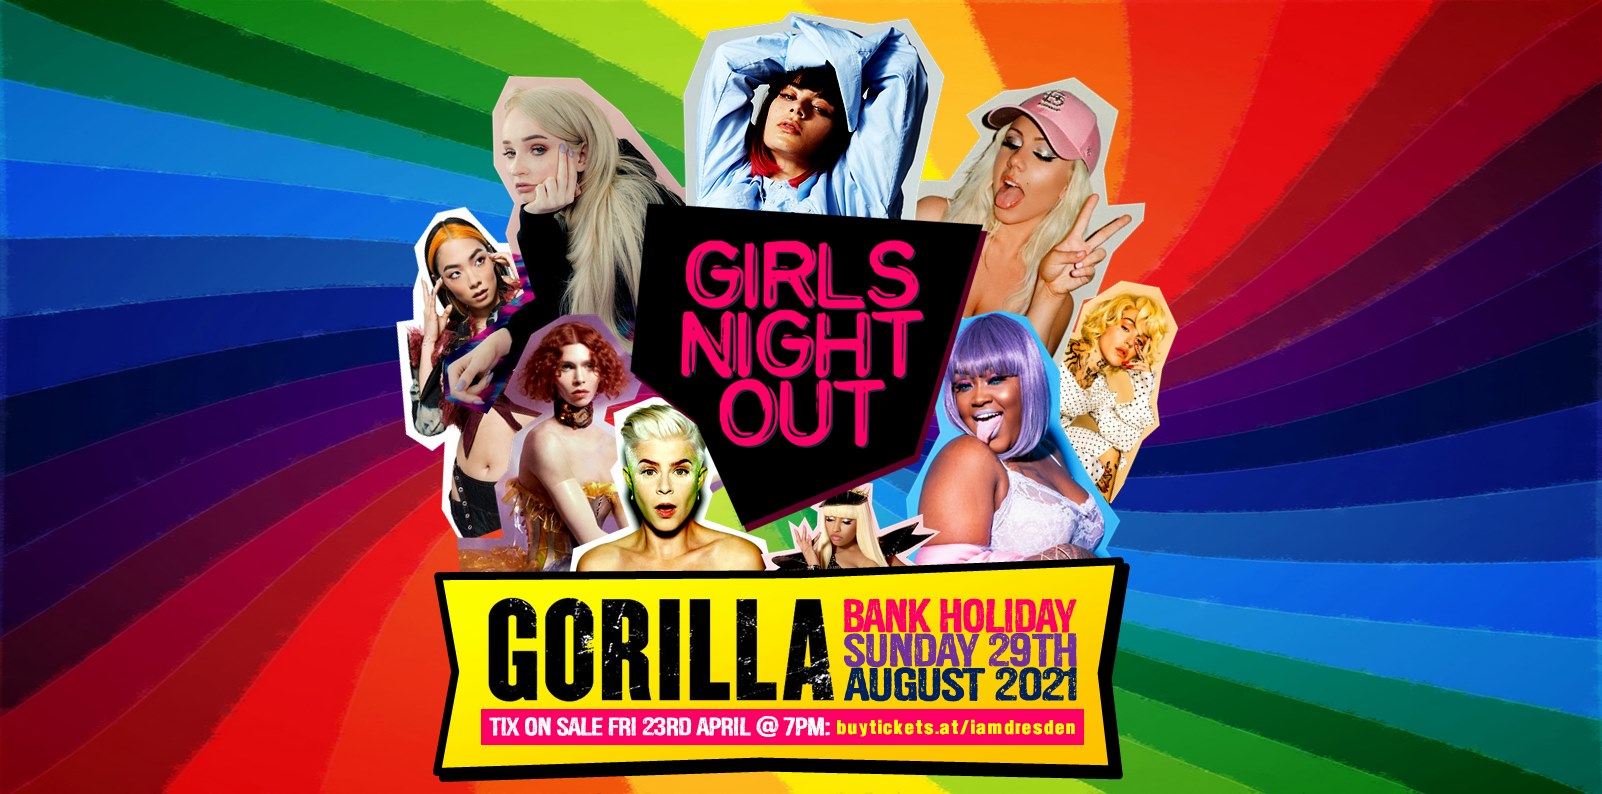 A composit image of pop stars for Girls Night Out at Gorilla